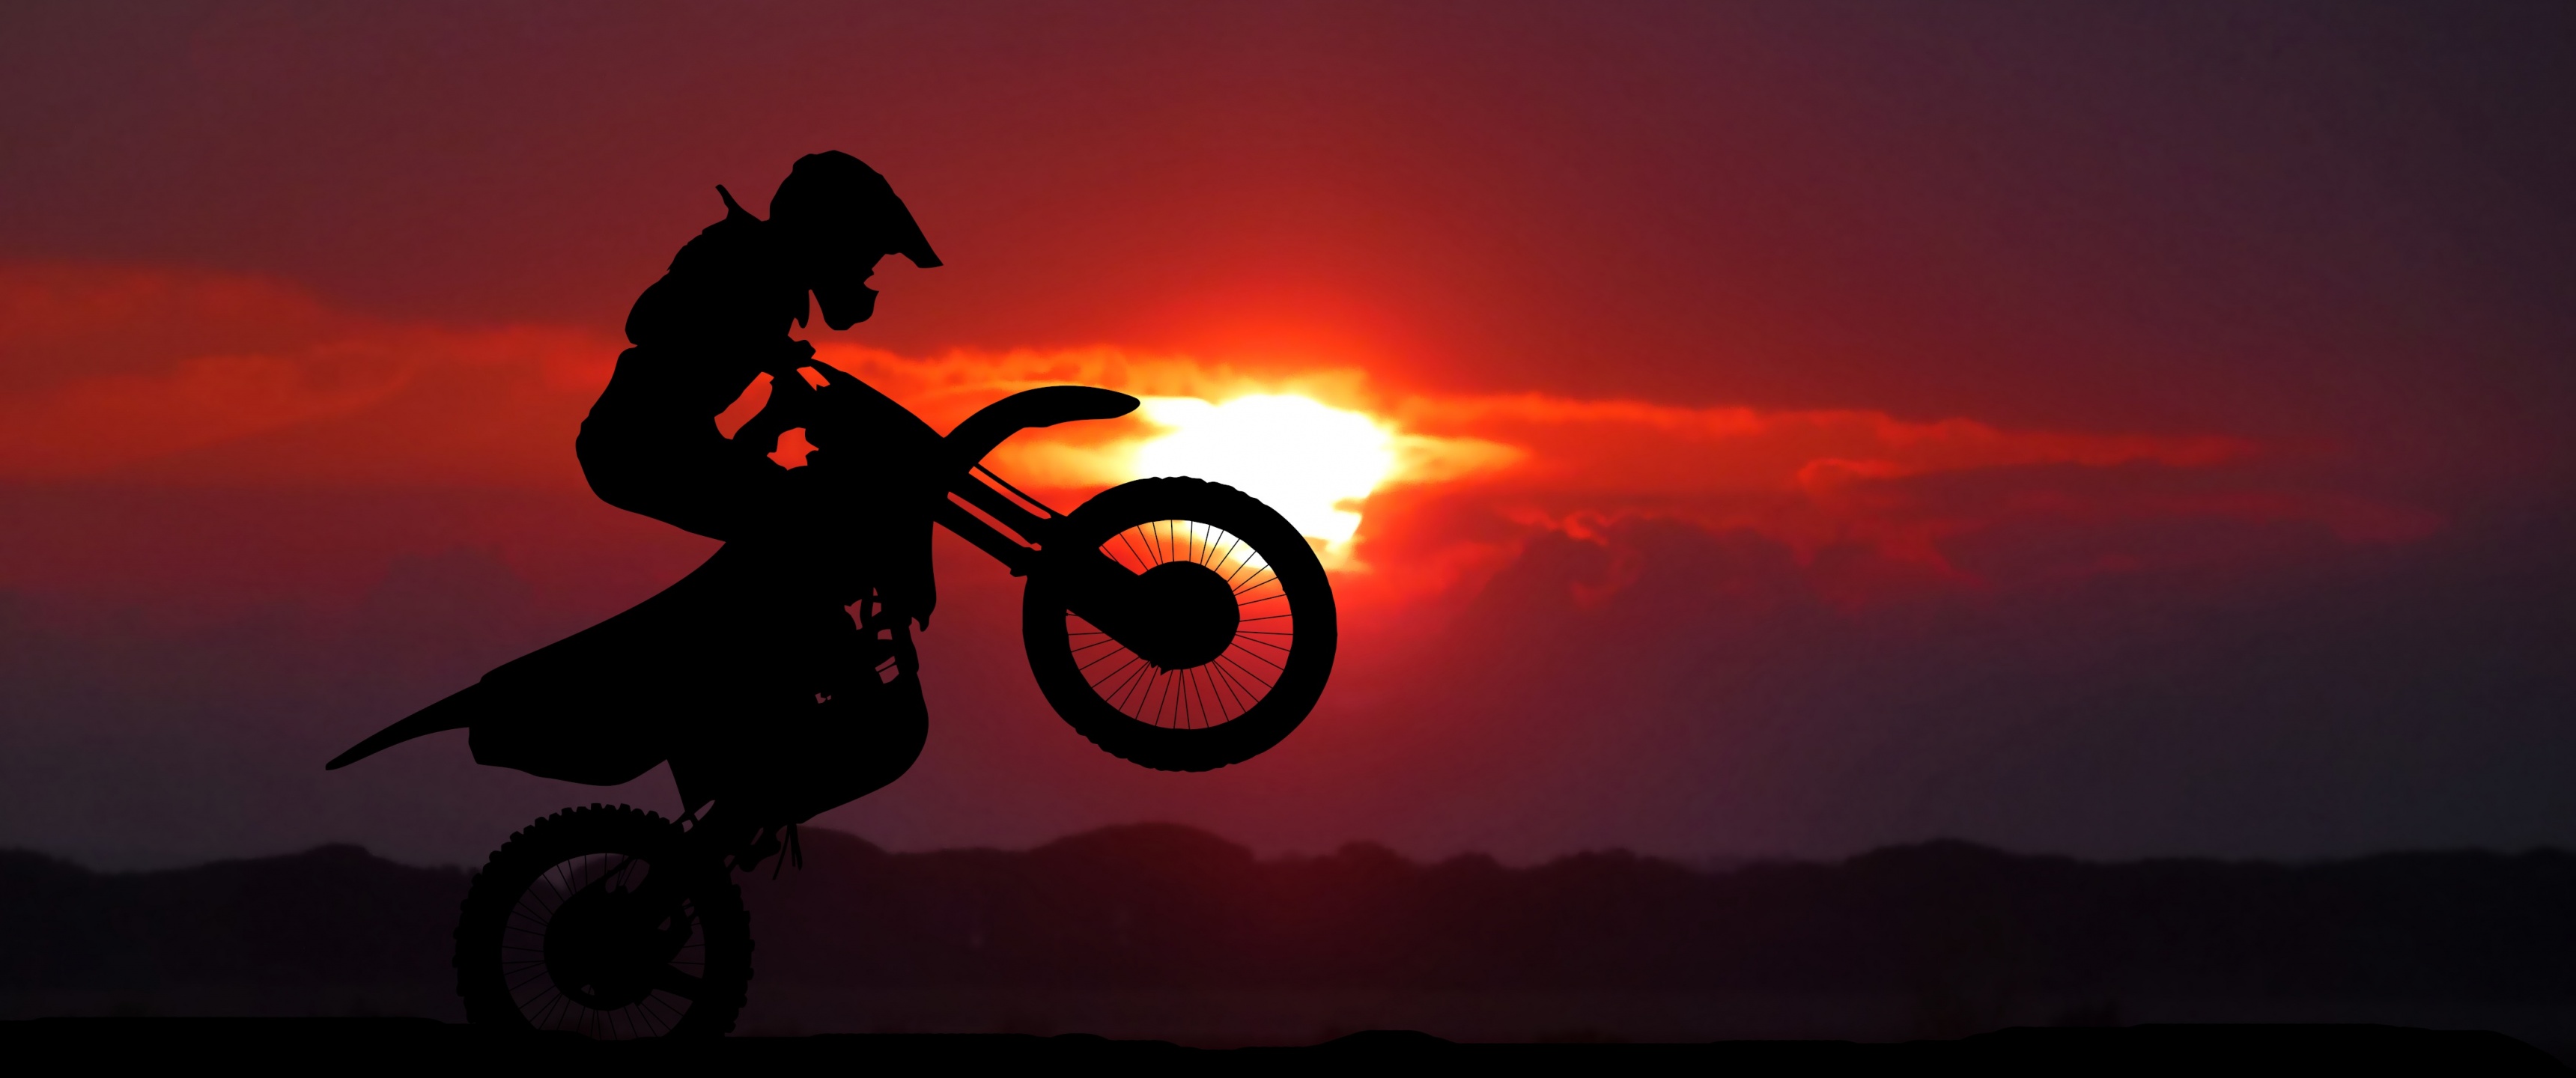 download the new for android Sunset Bike Racing - Motocross